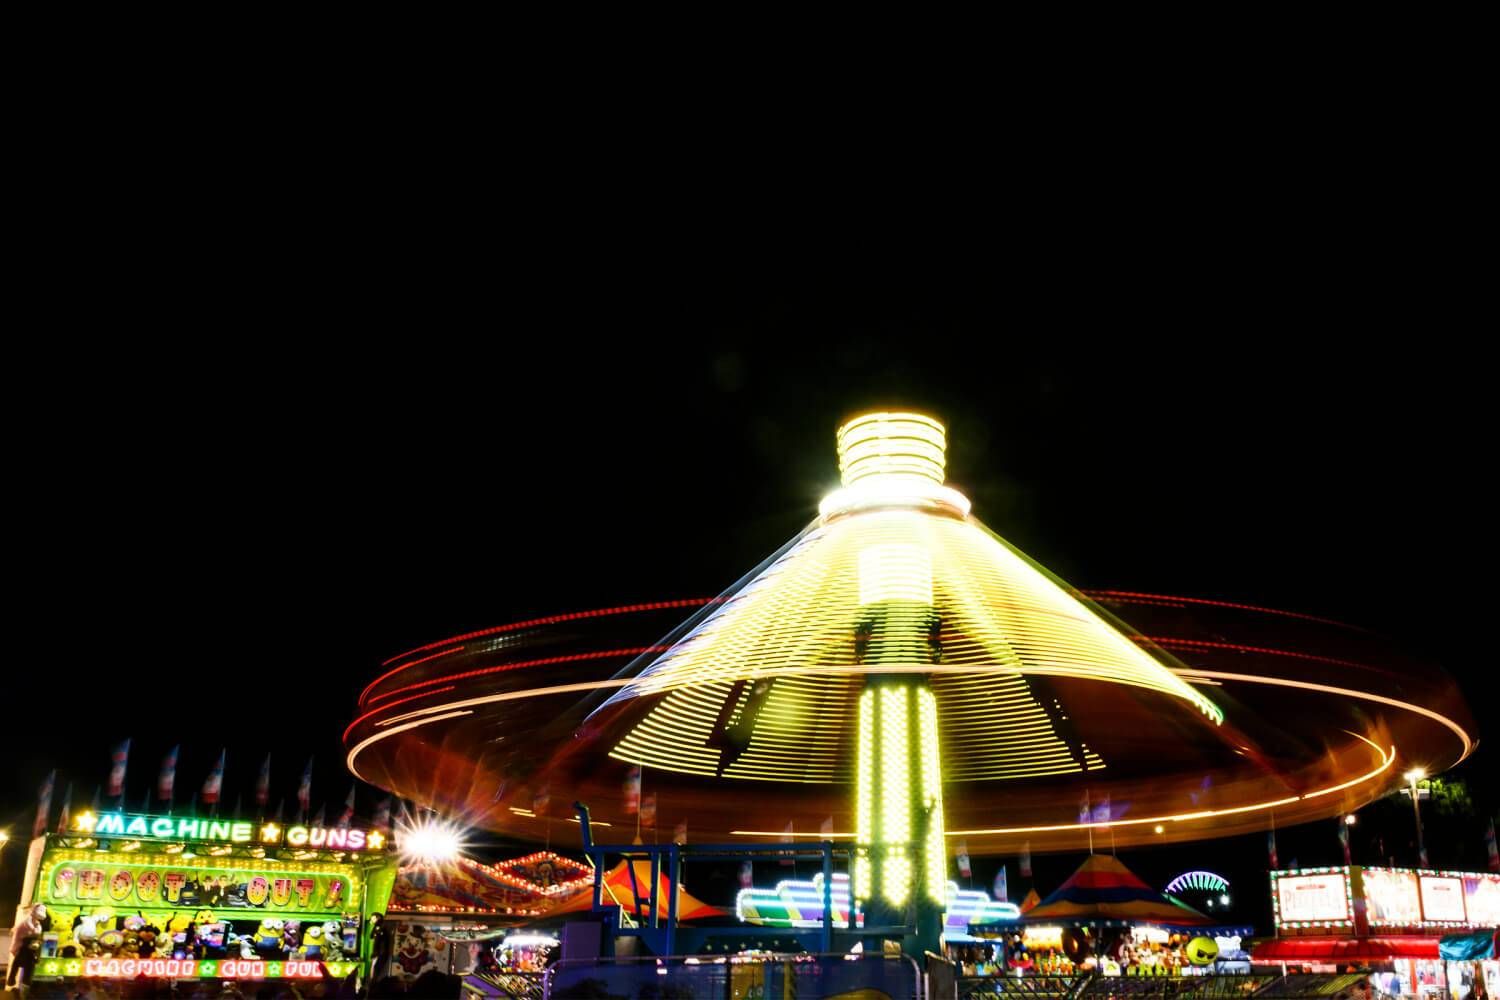 The spinning, whirling rides of the Midway. Photo by Matt Mead.